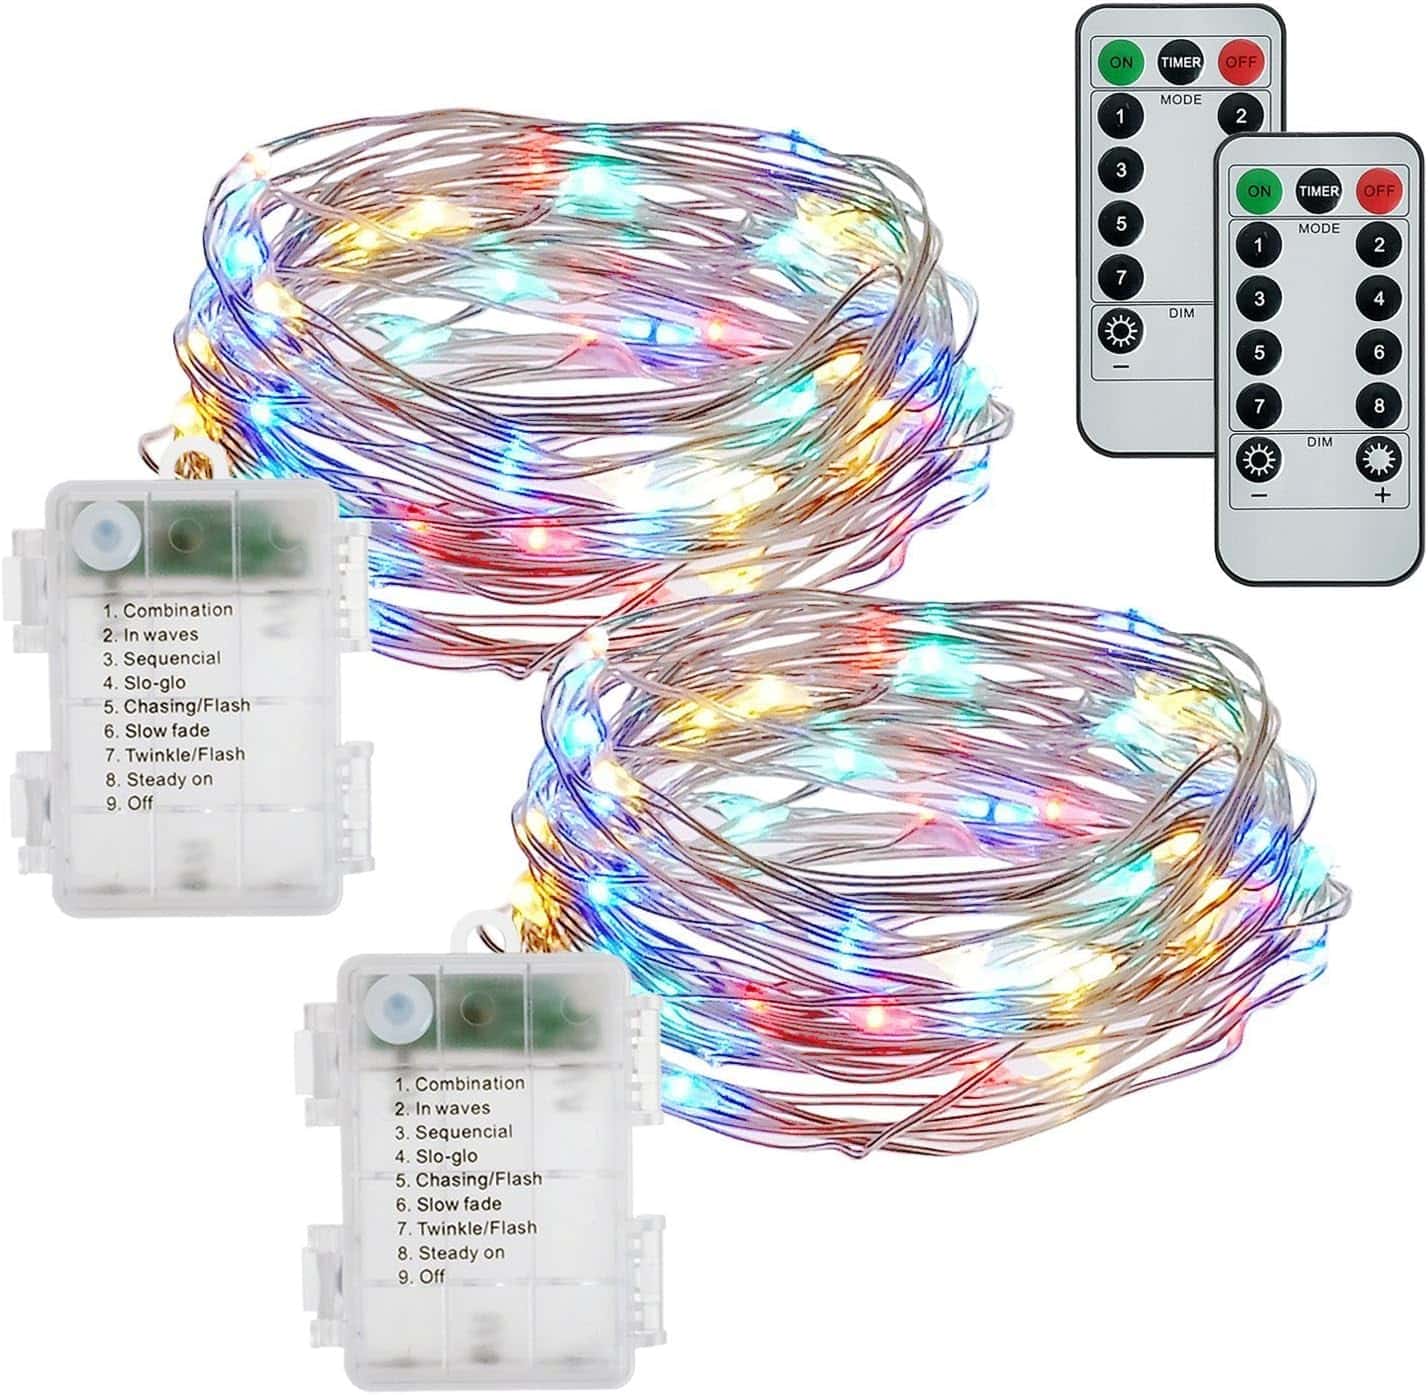 buways Fairy Lights,2-Pack Battery Operated Waterproof Multicolor 50 LED Fairy String Lights,16.4ft Silver Wire Light with Remote Control for Christmas Parties,Garden and Home Decoration